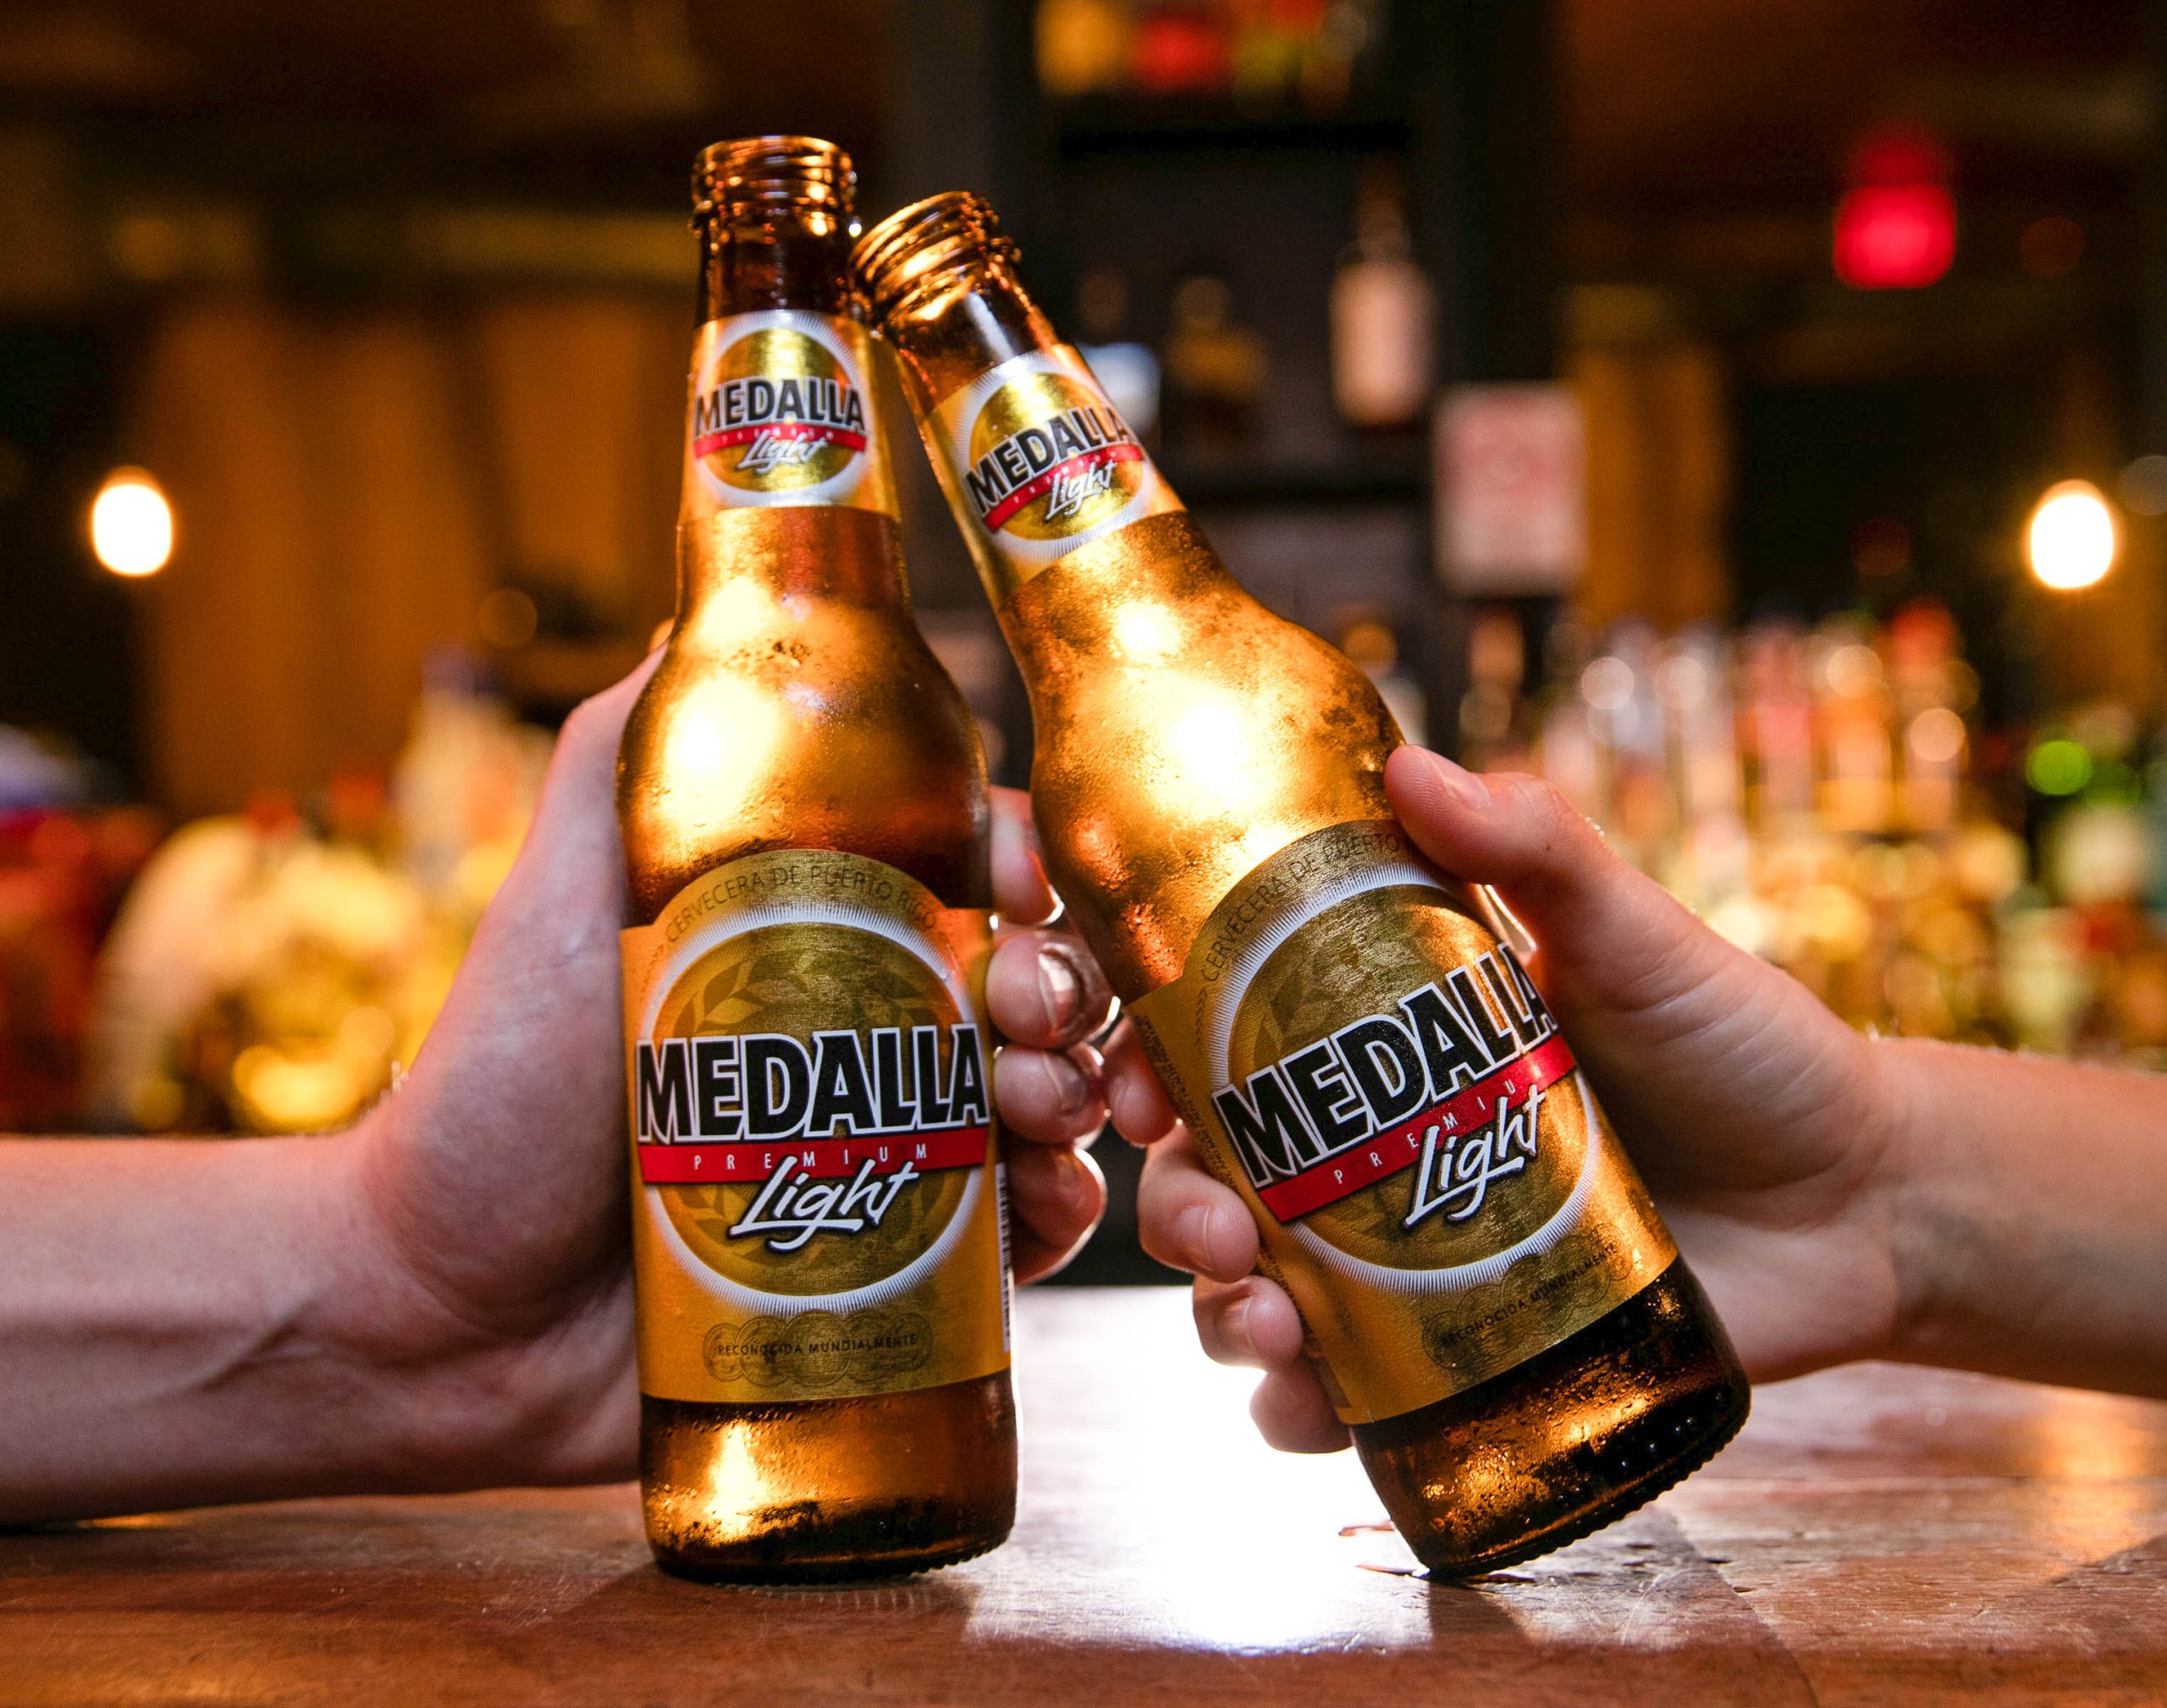 The Medalla Bottle: A Symbol of Puerto Rican Culture and Flavor